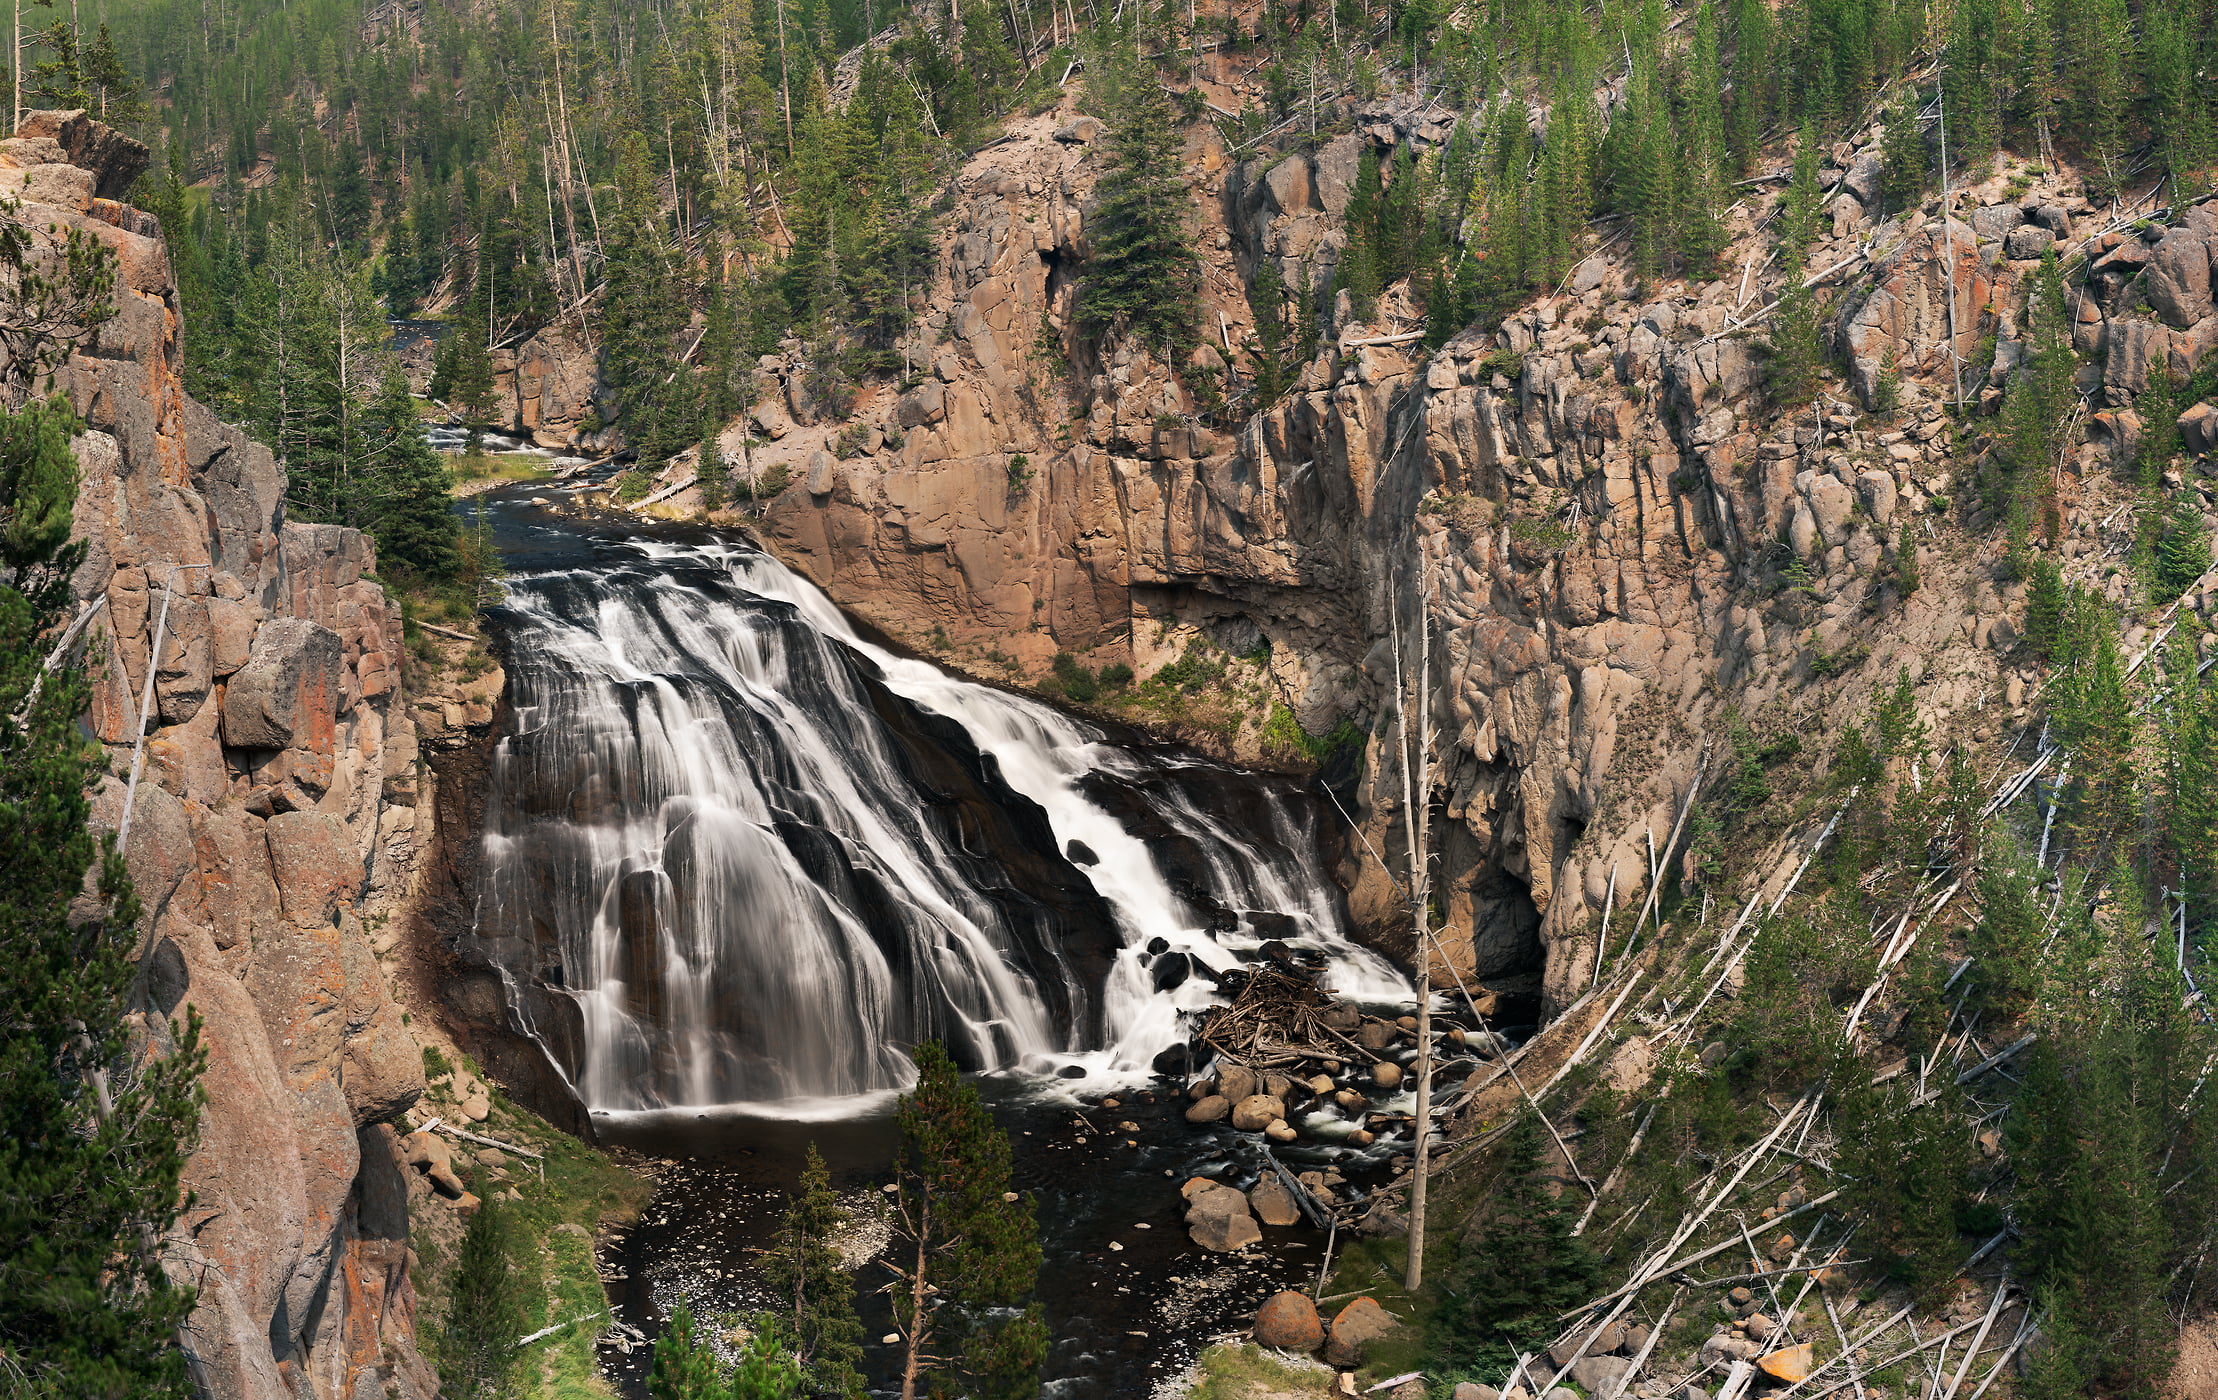 660 megapixels! A very high resolution, large-format VAST photo print of Gibbon Falls waterfall; photograph created by Phillip Noll in Yellowstone National Park, Wyoming